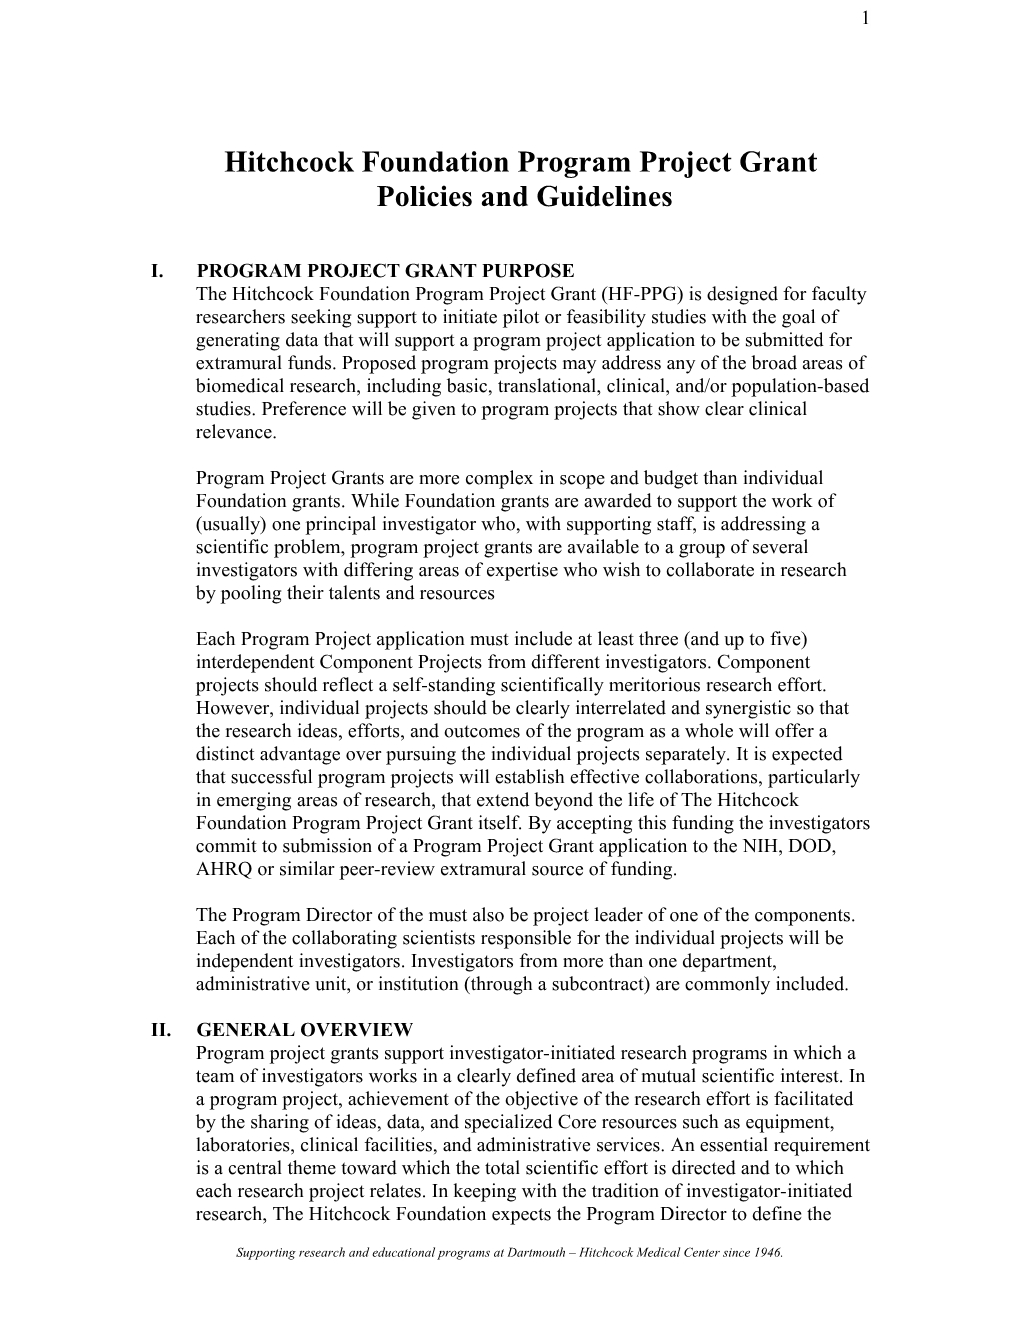 Hitchcock Foundation Program Project Grant (HF-PPG) Policies and Guidelines